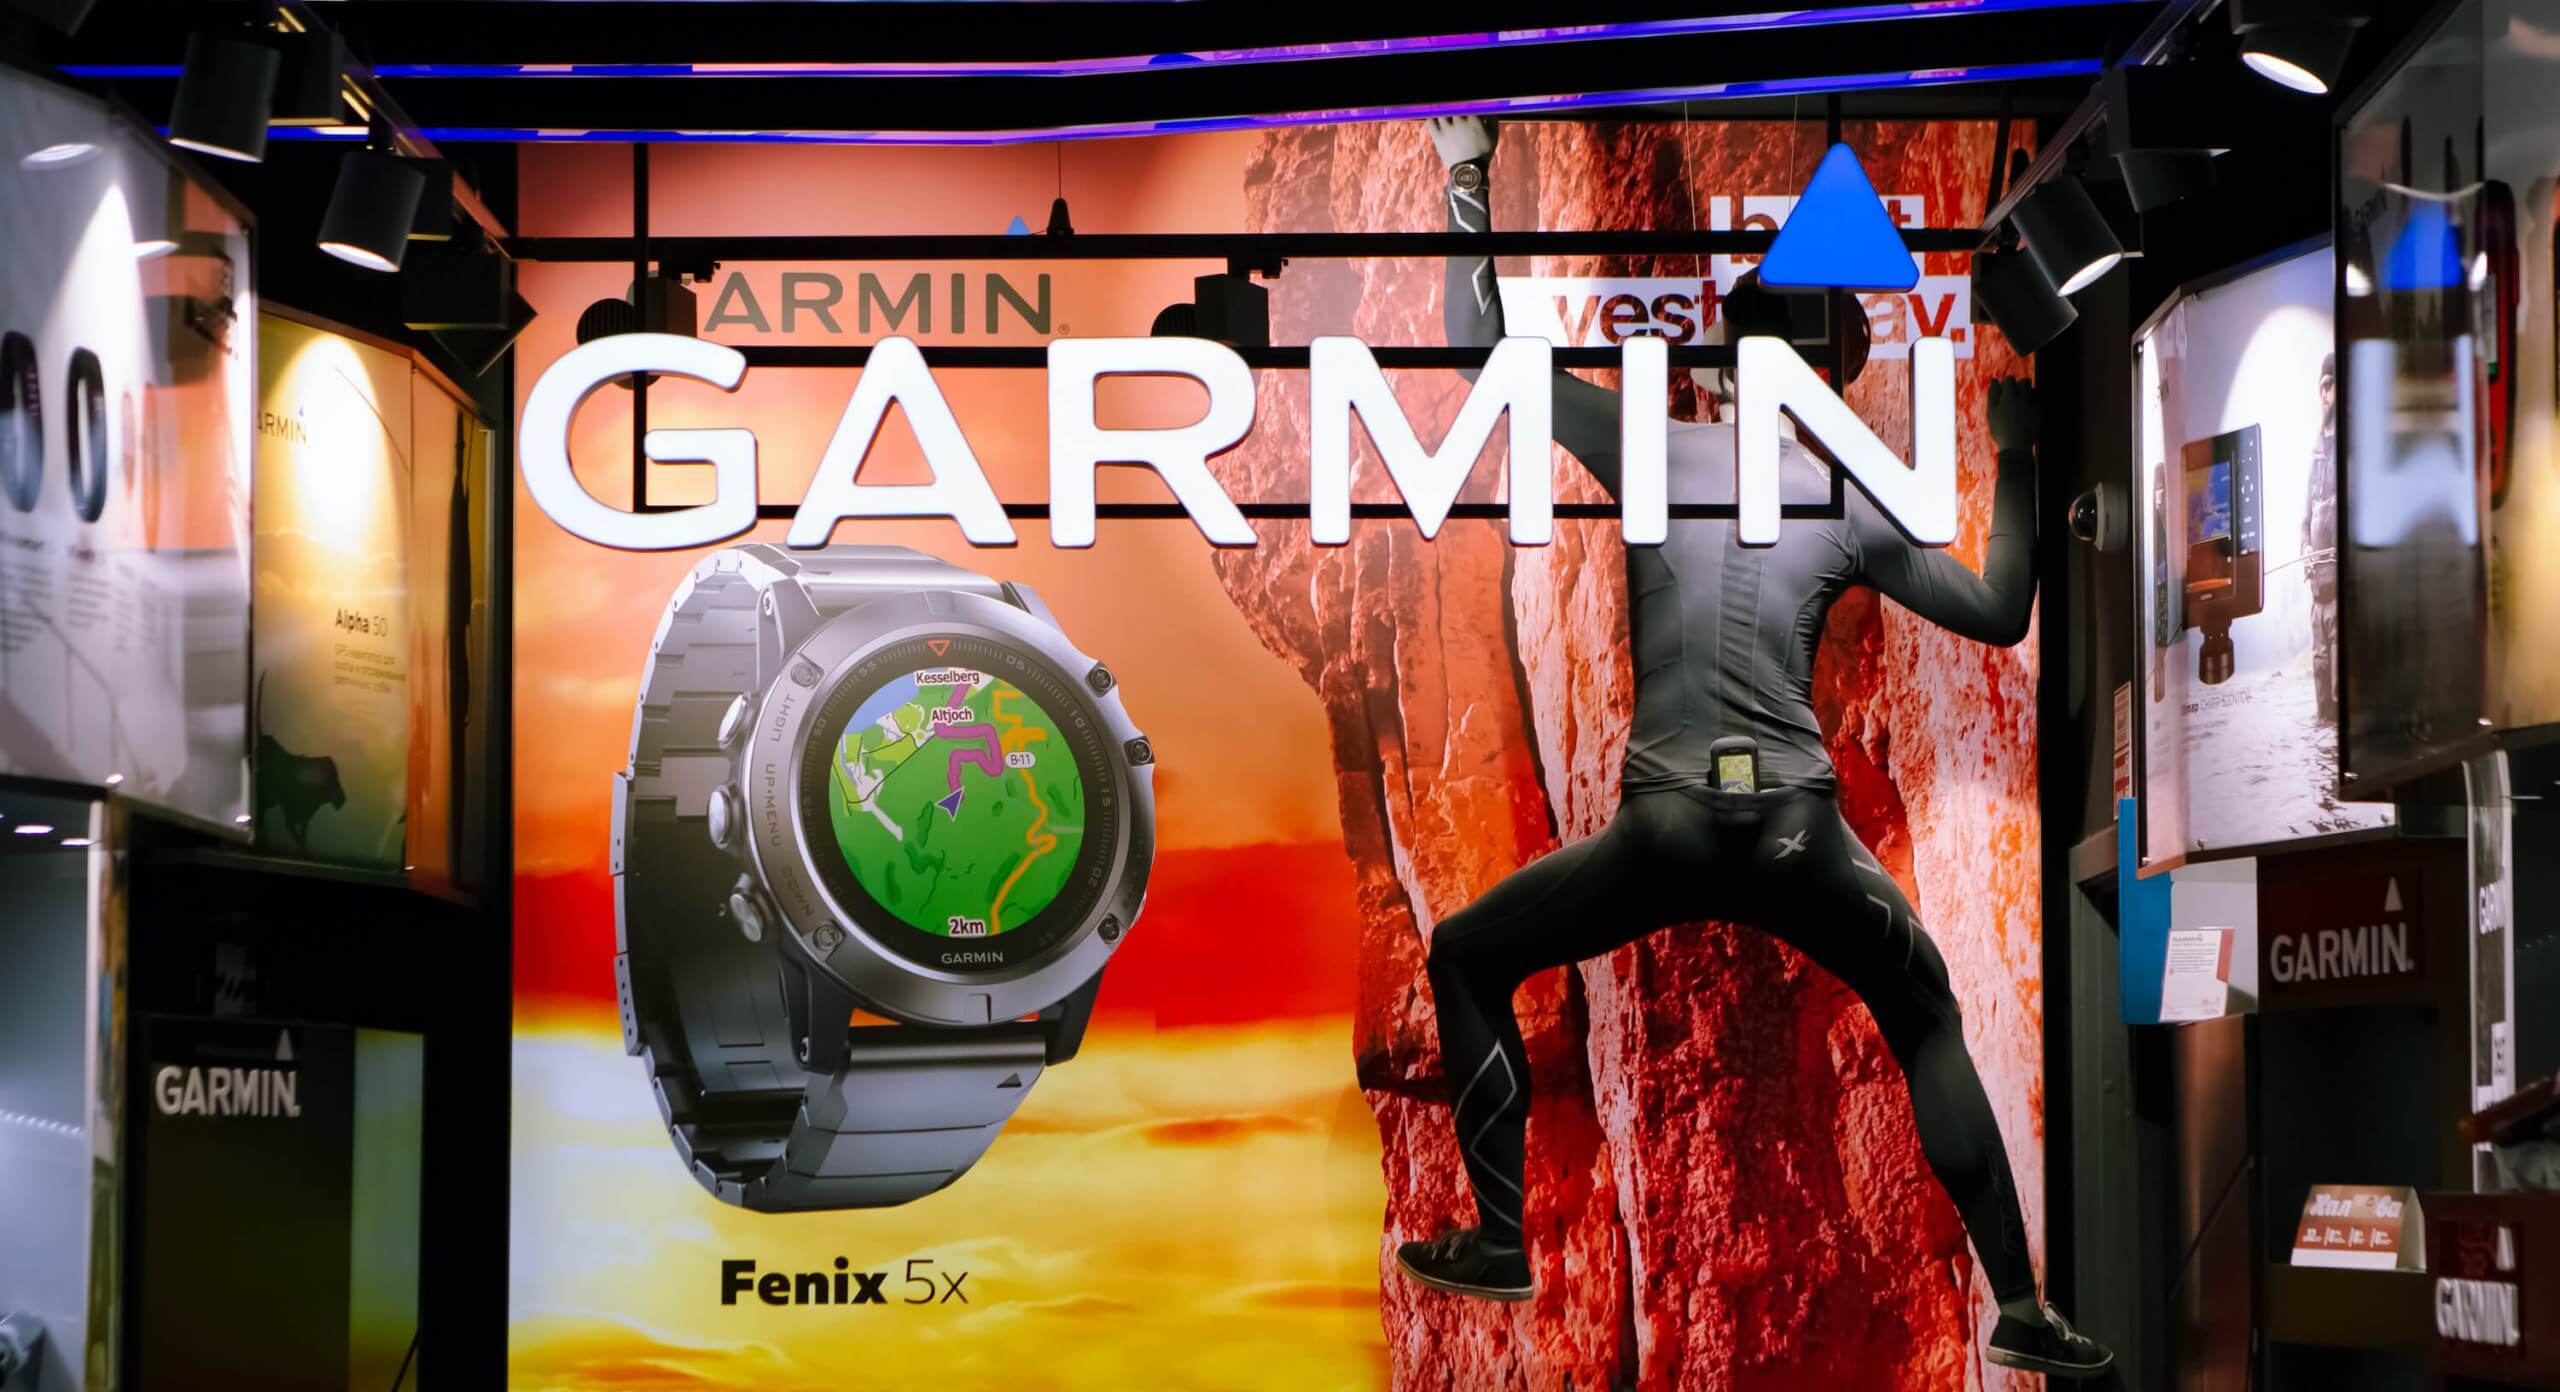 Garmin confirms cyberattack caused last week's company-wide outage